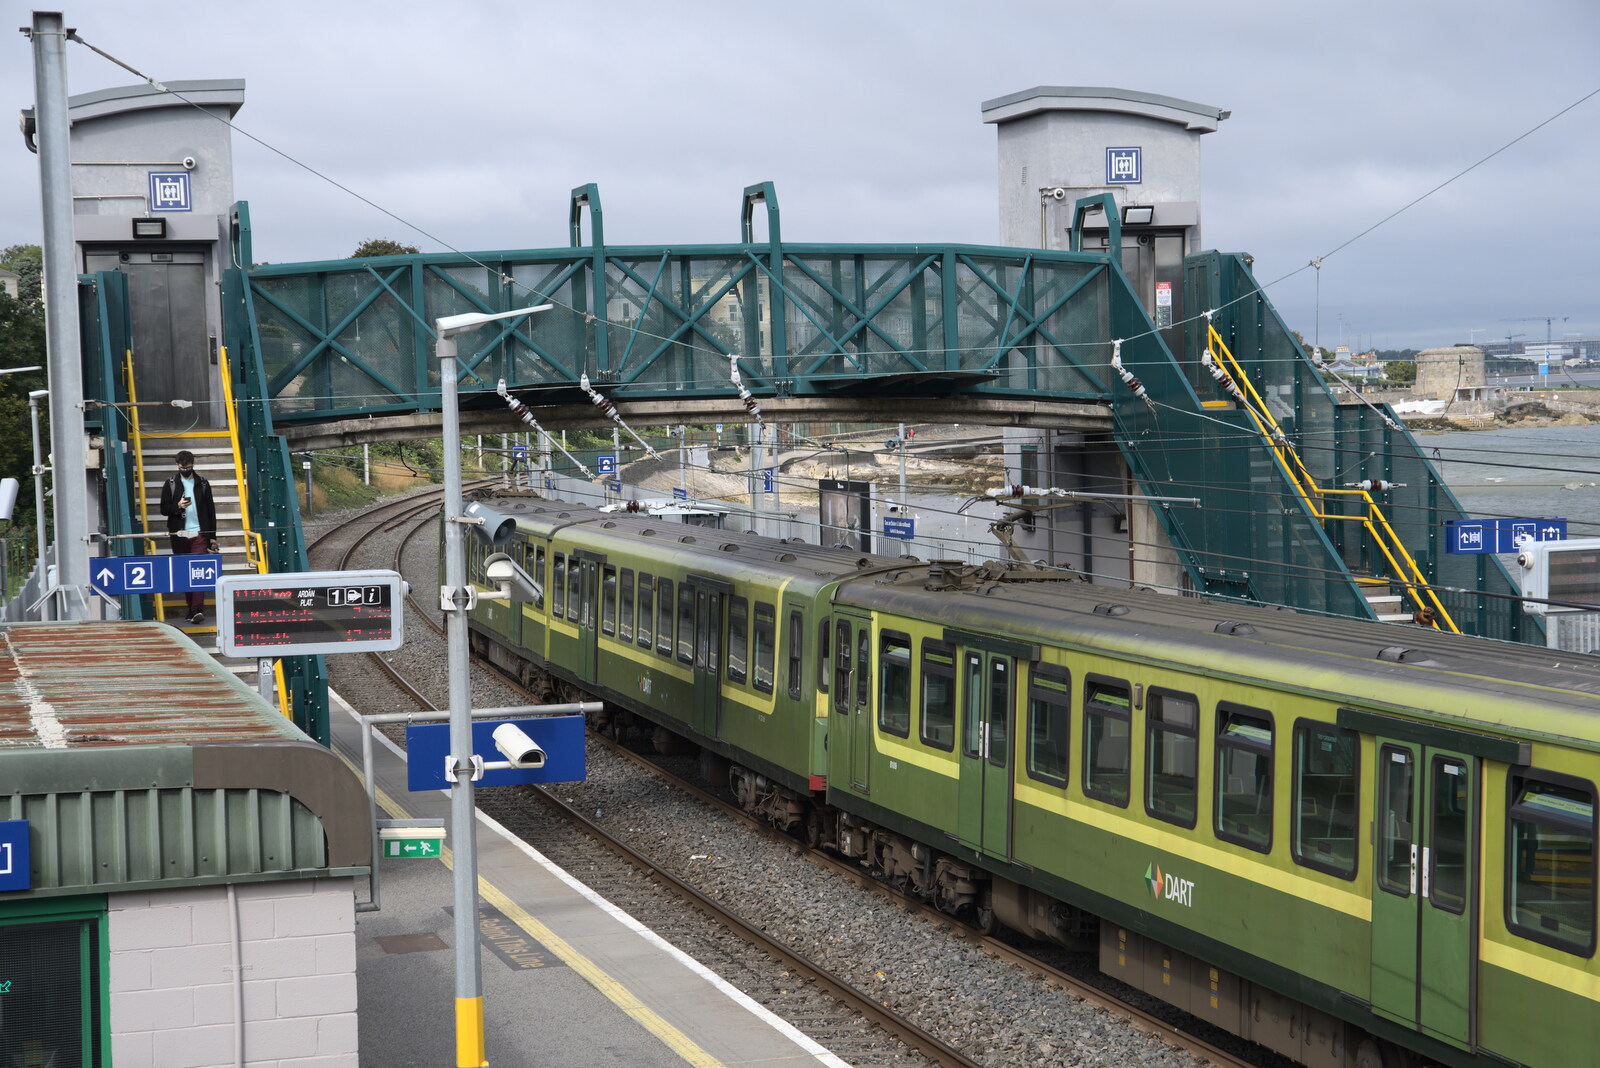 A DART train at Seapoint station from The Guinness Storehouse Tour, St. James's Gate, Dublin, Ireland - 17th August 2021